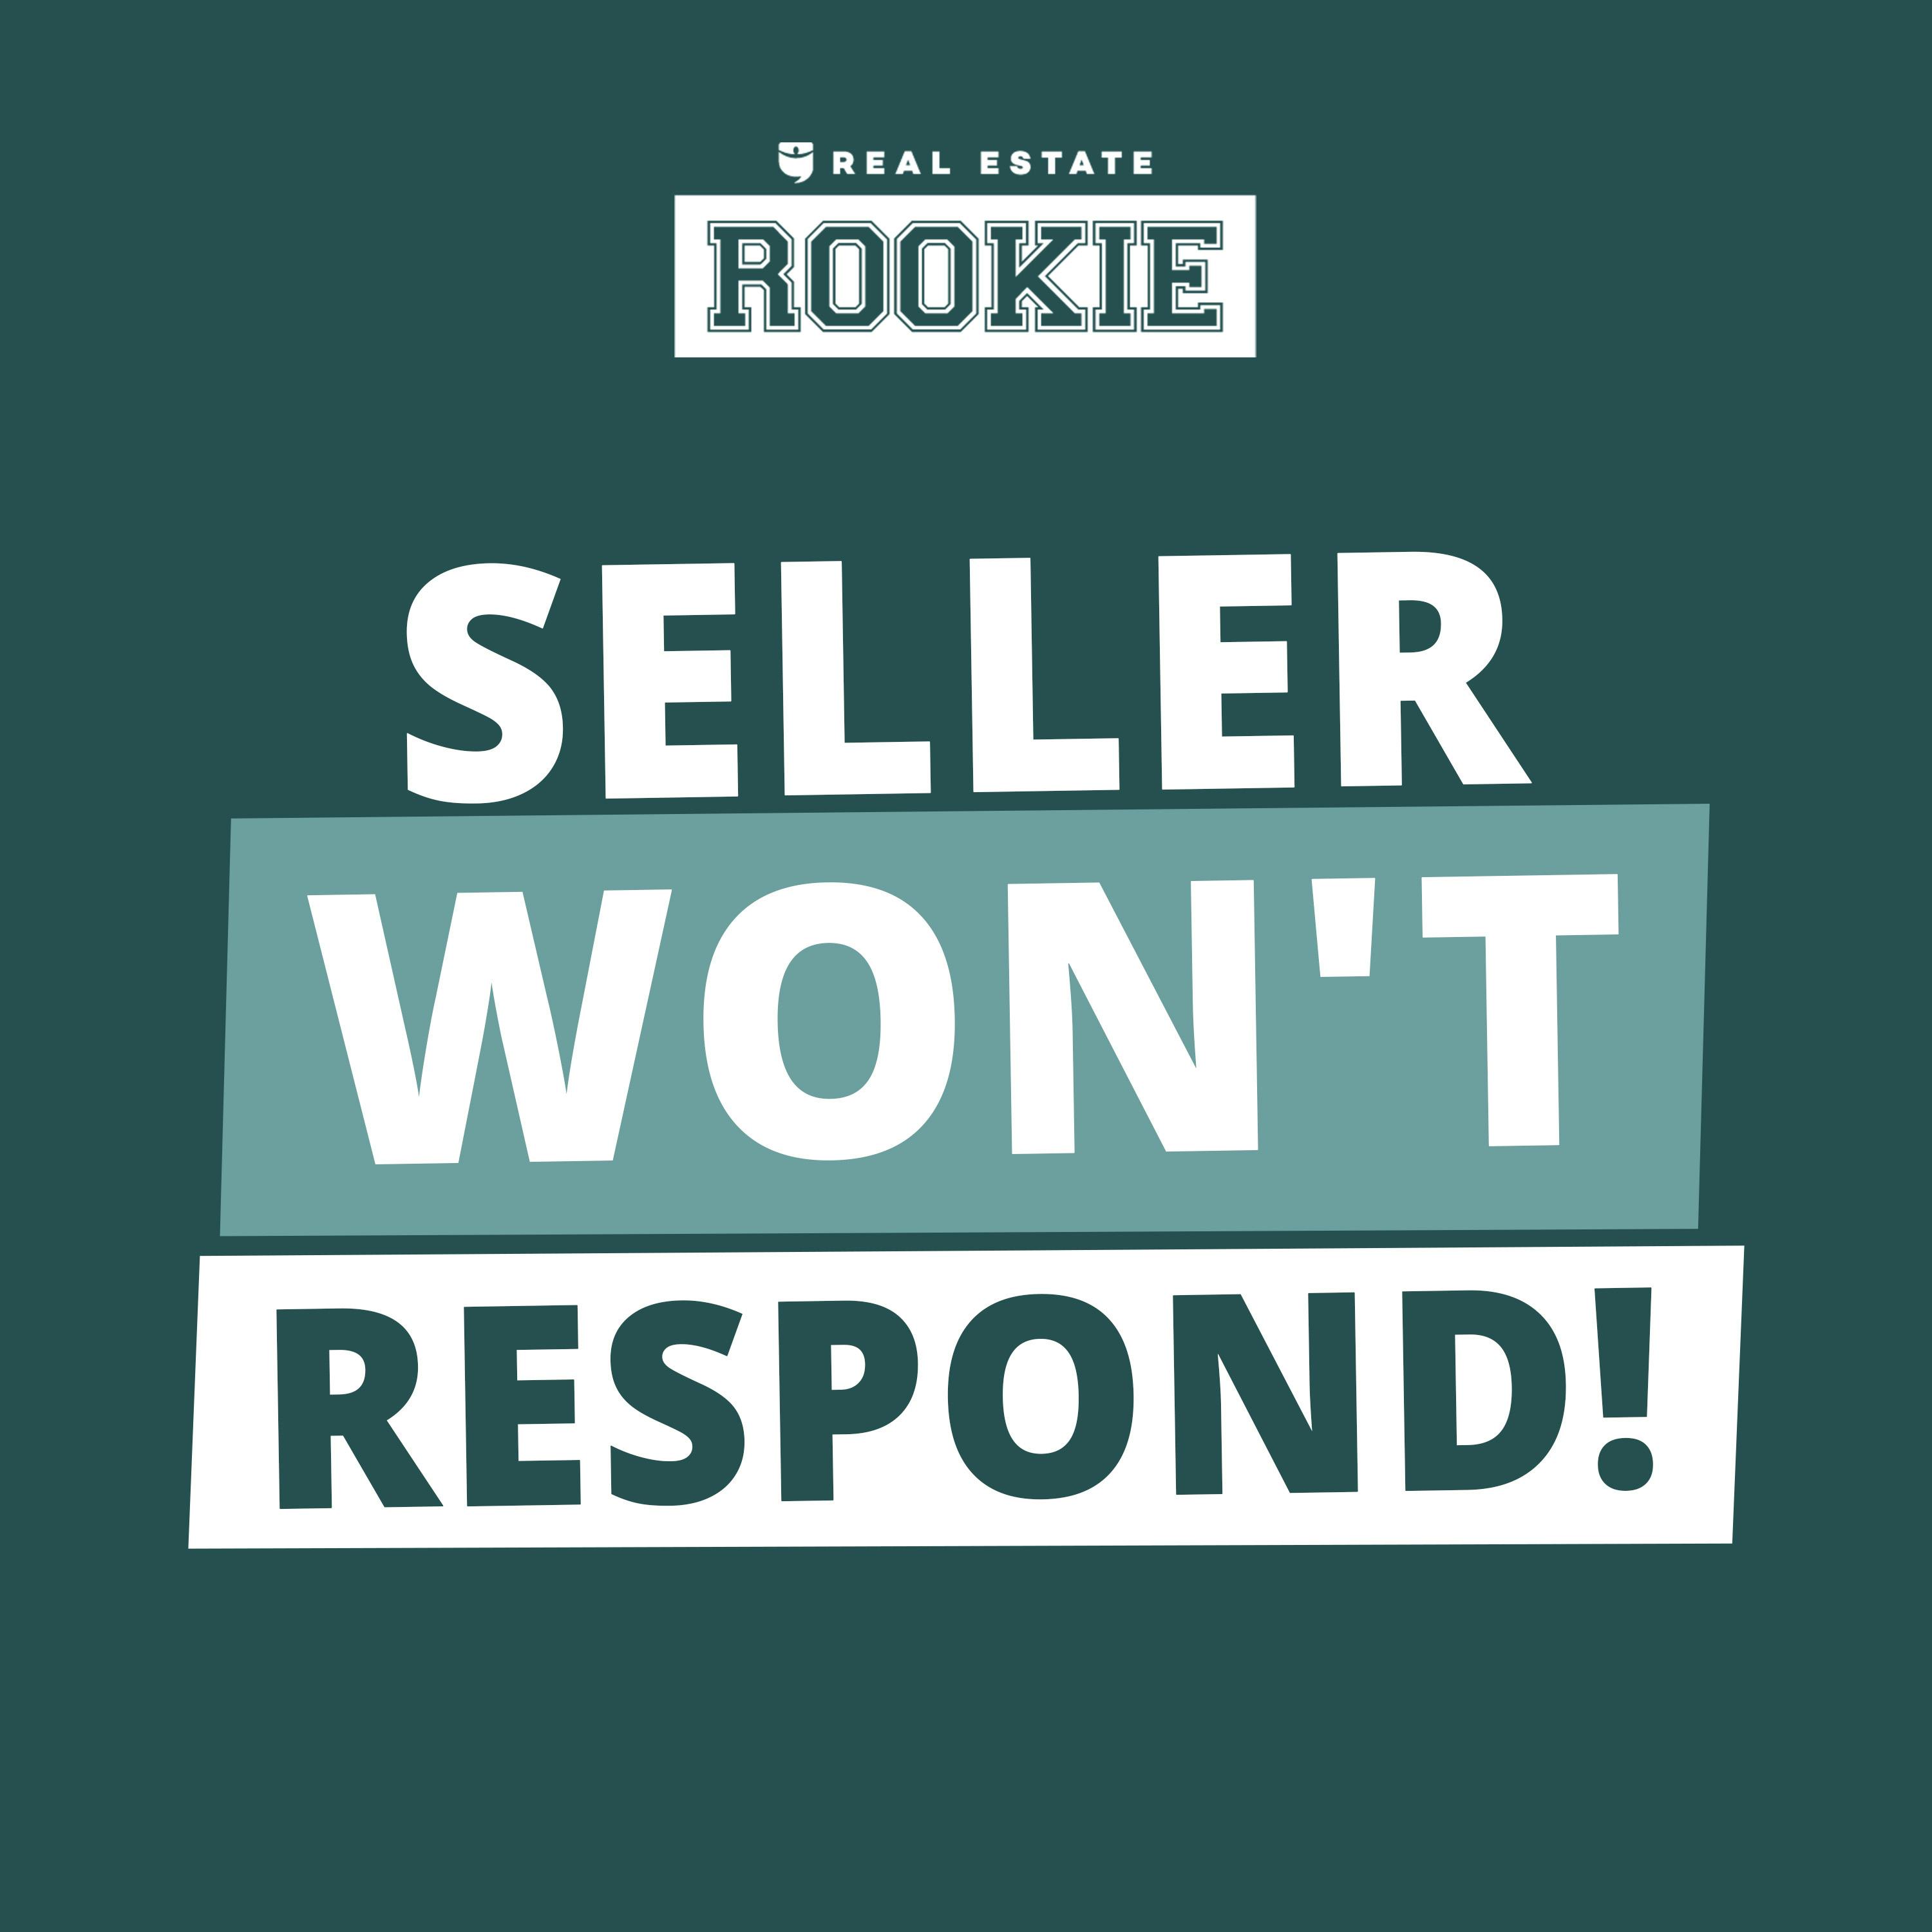 312: Rookie Reply: The Seller Hasn't Responded...What Do I Do?